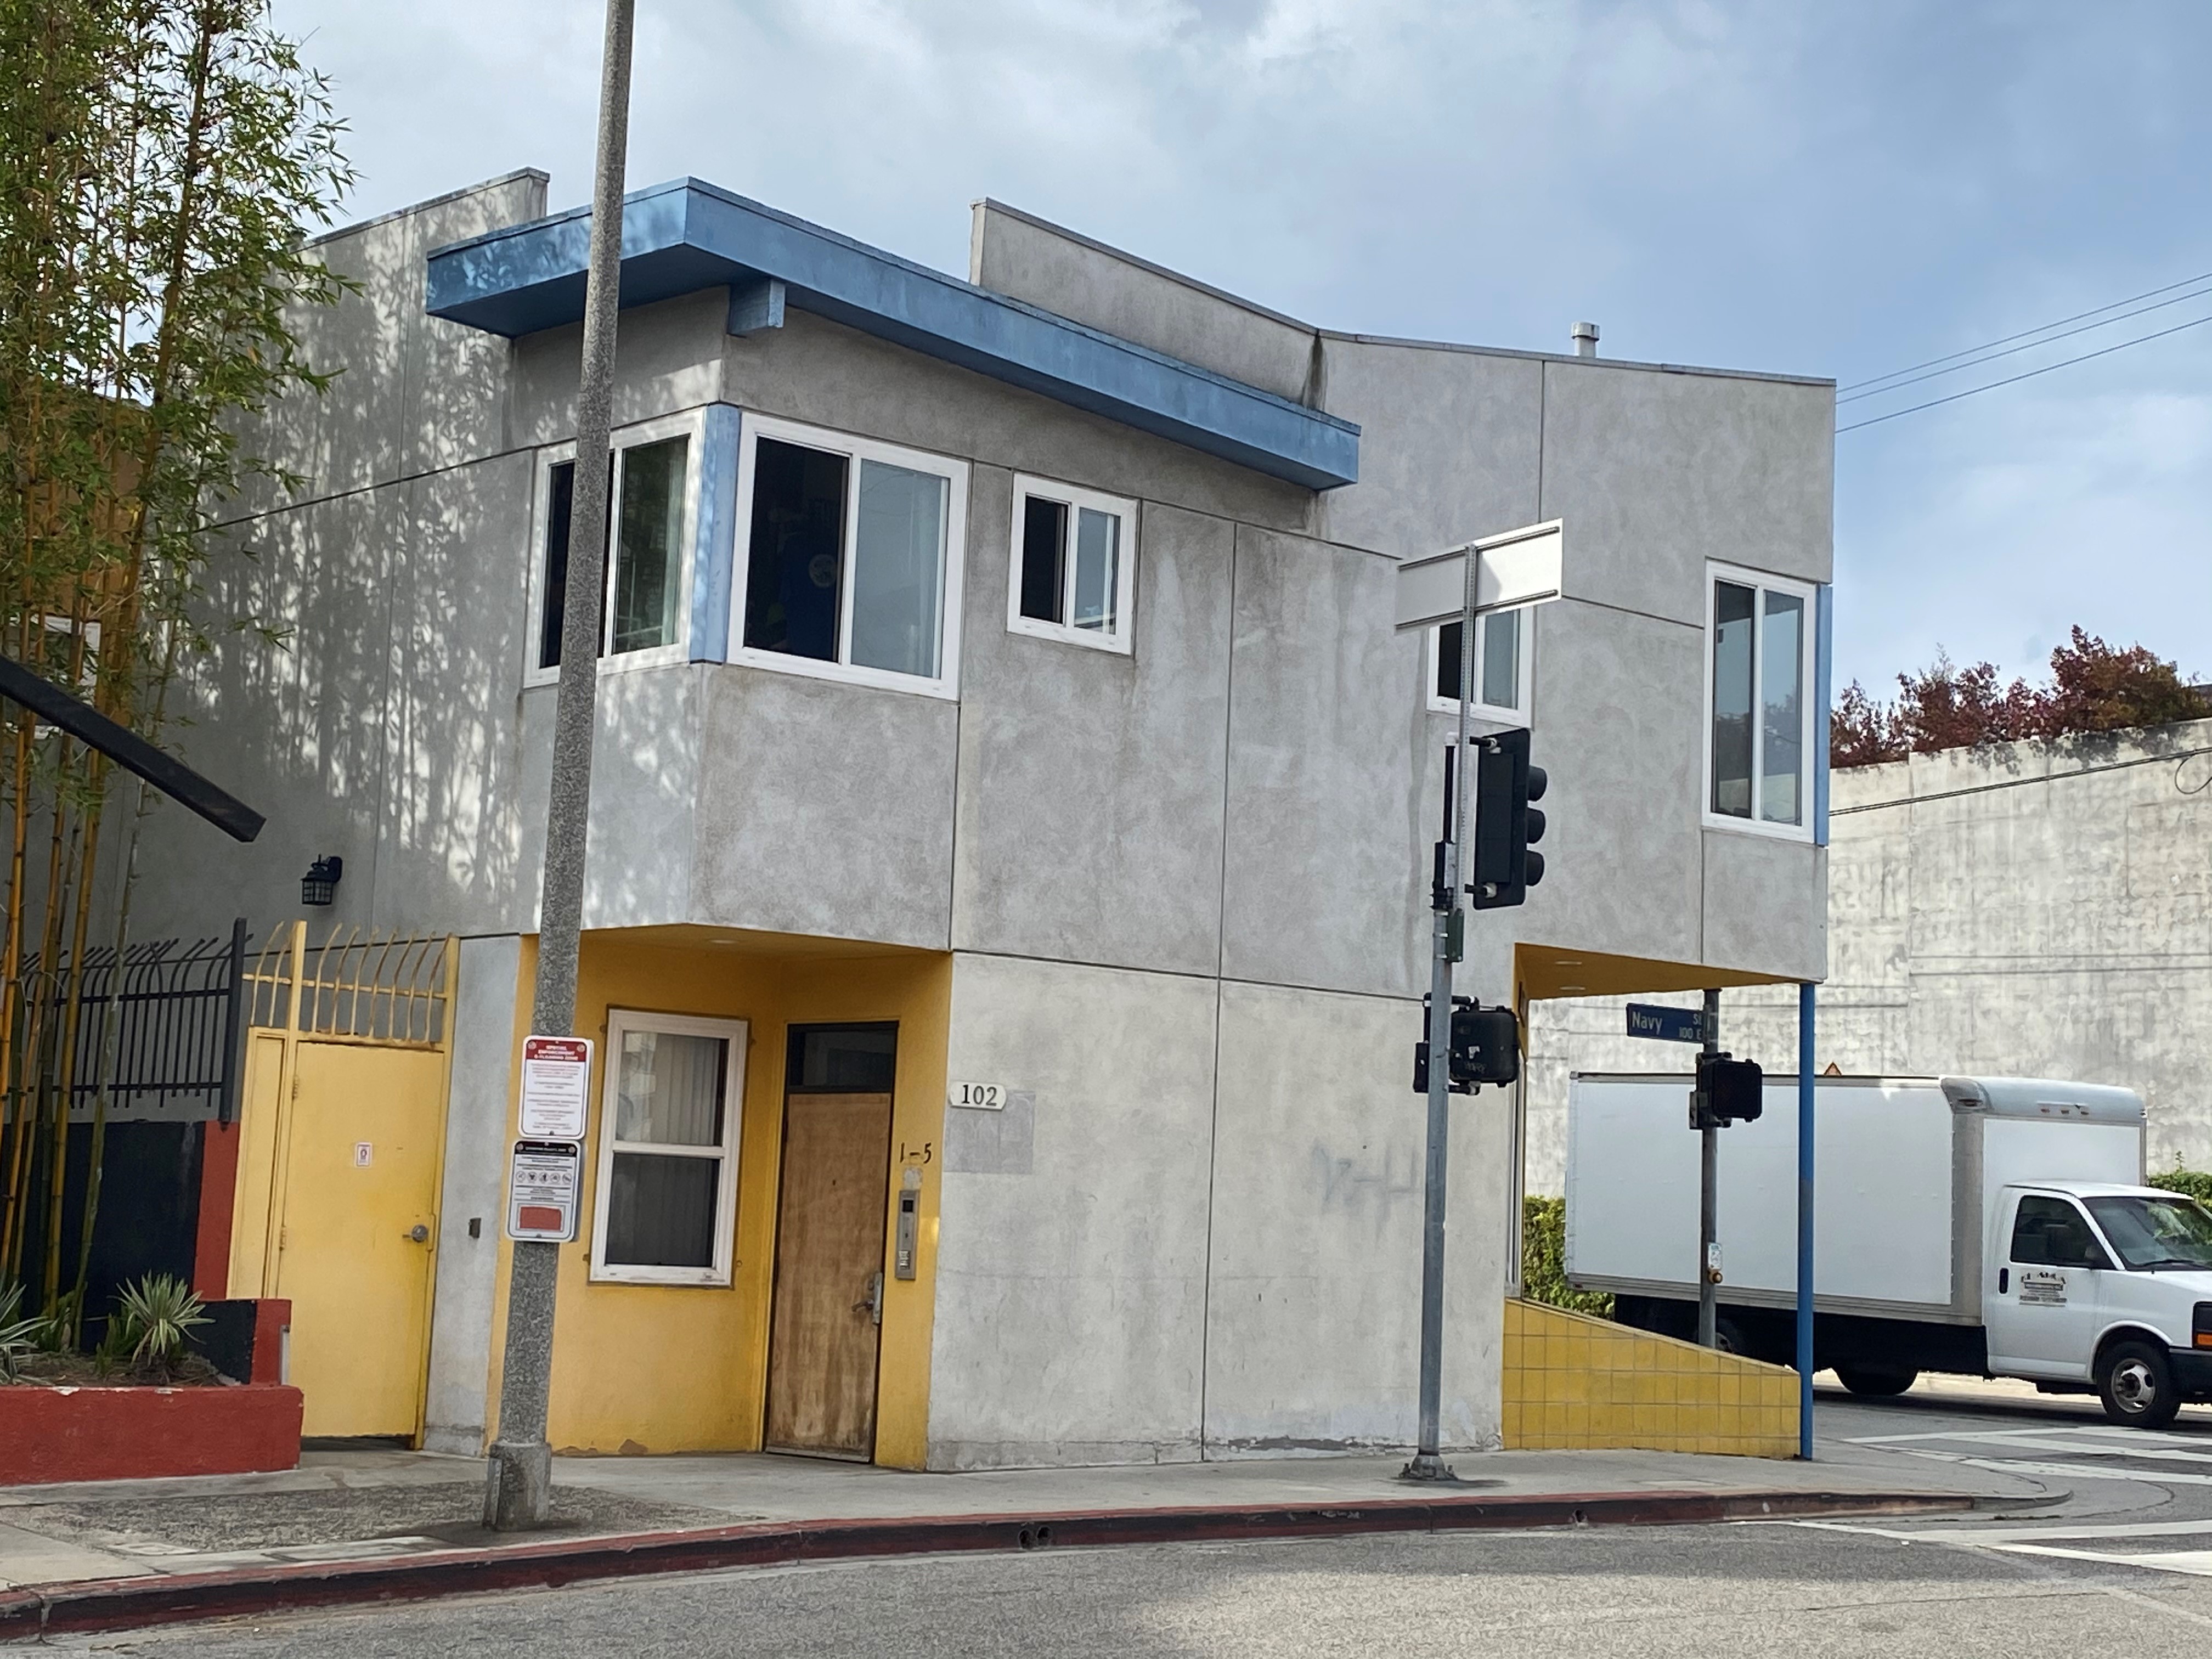 Street view of Navy Street Apartments. A grey, yellow and blue 2 story building